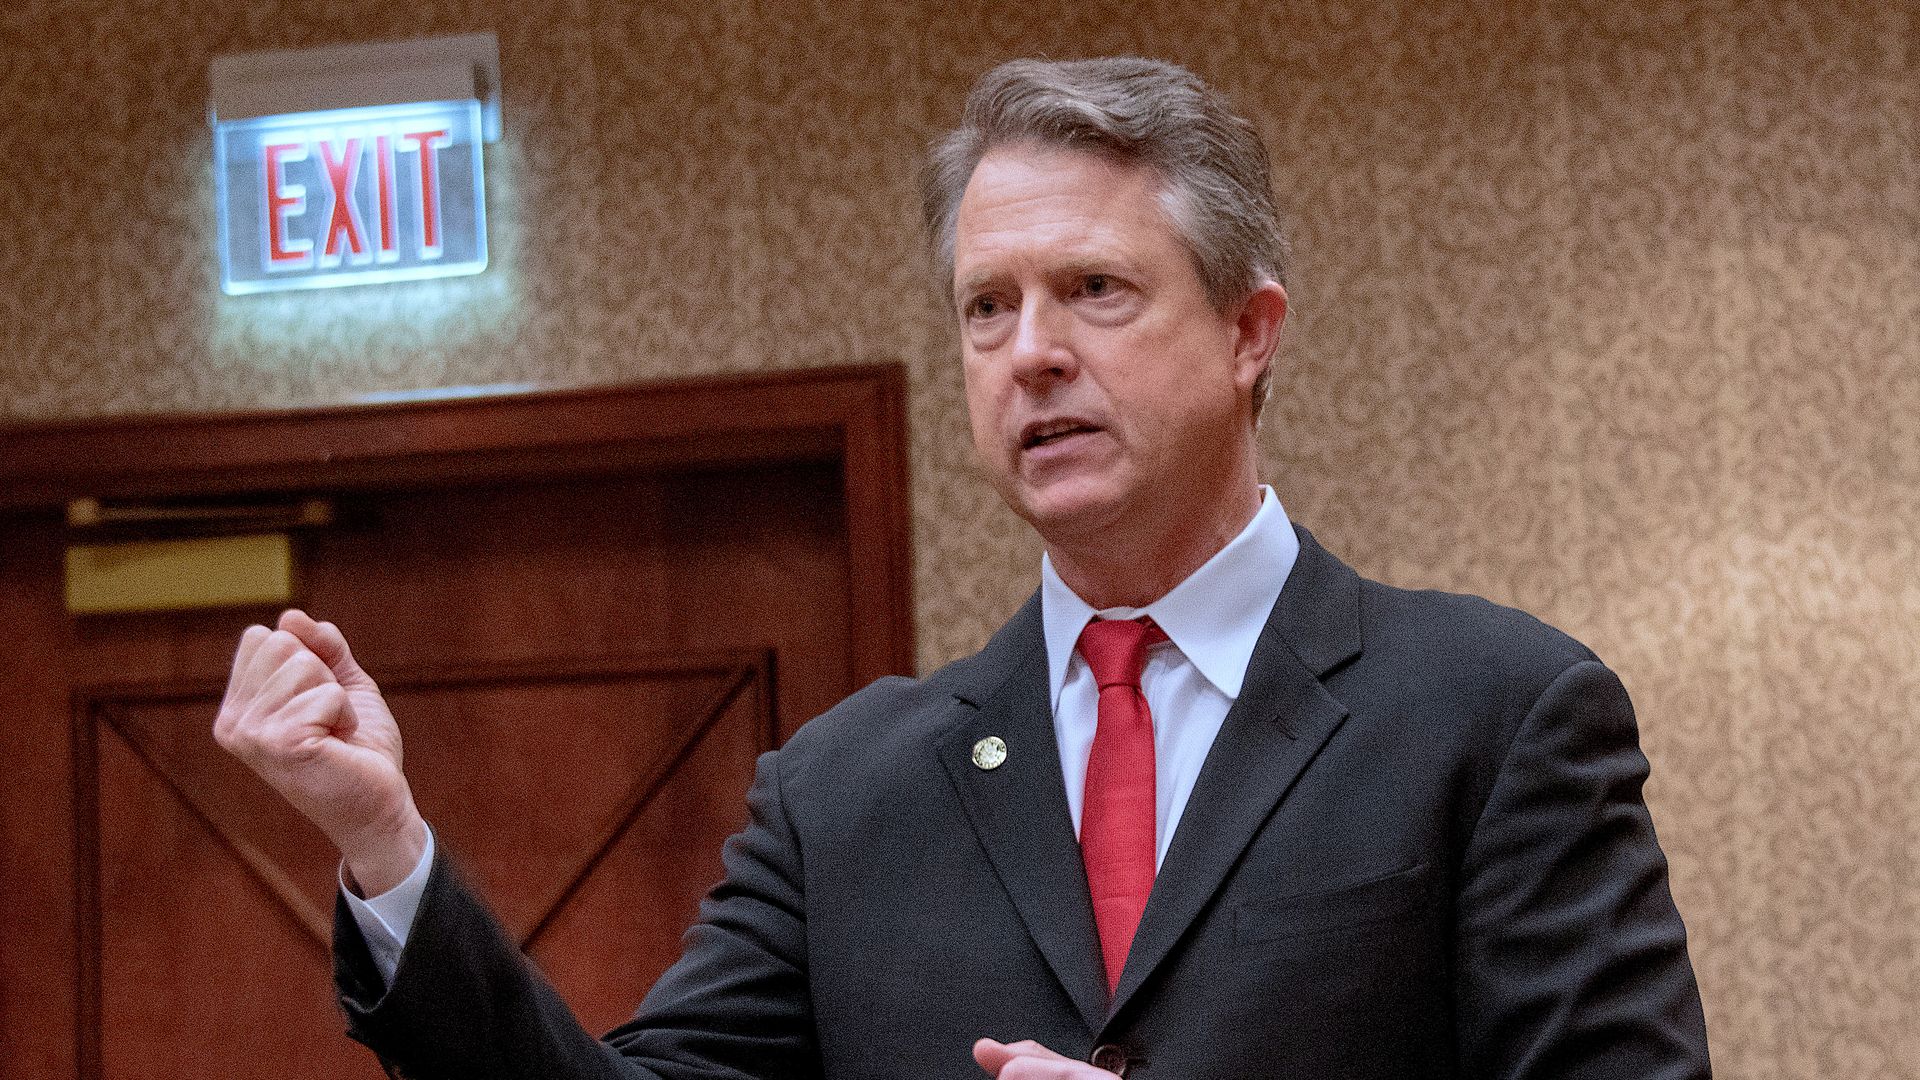 Rep. Roger Marshall with his hand in a fist as he speaks